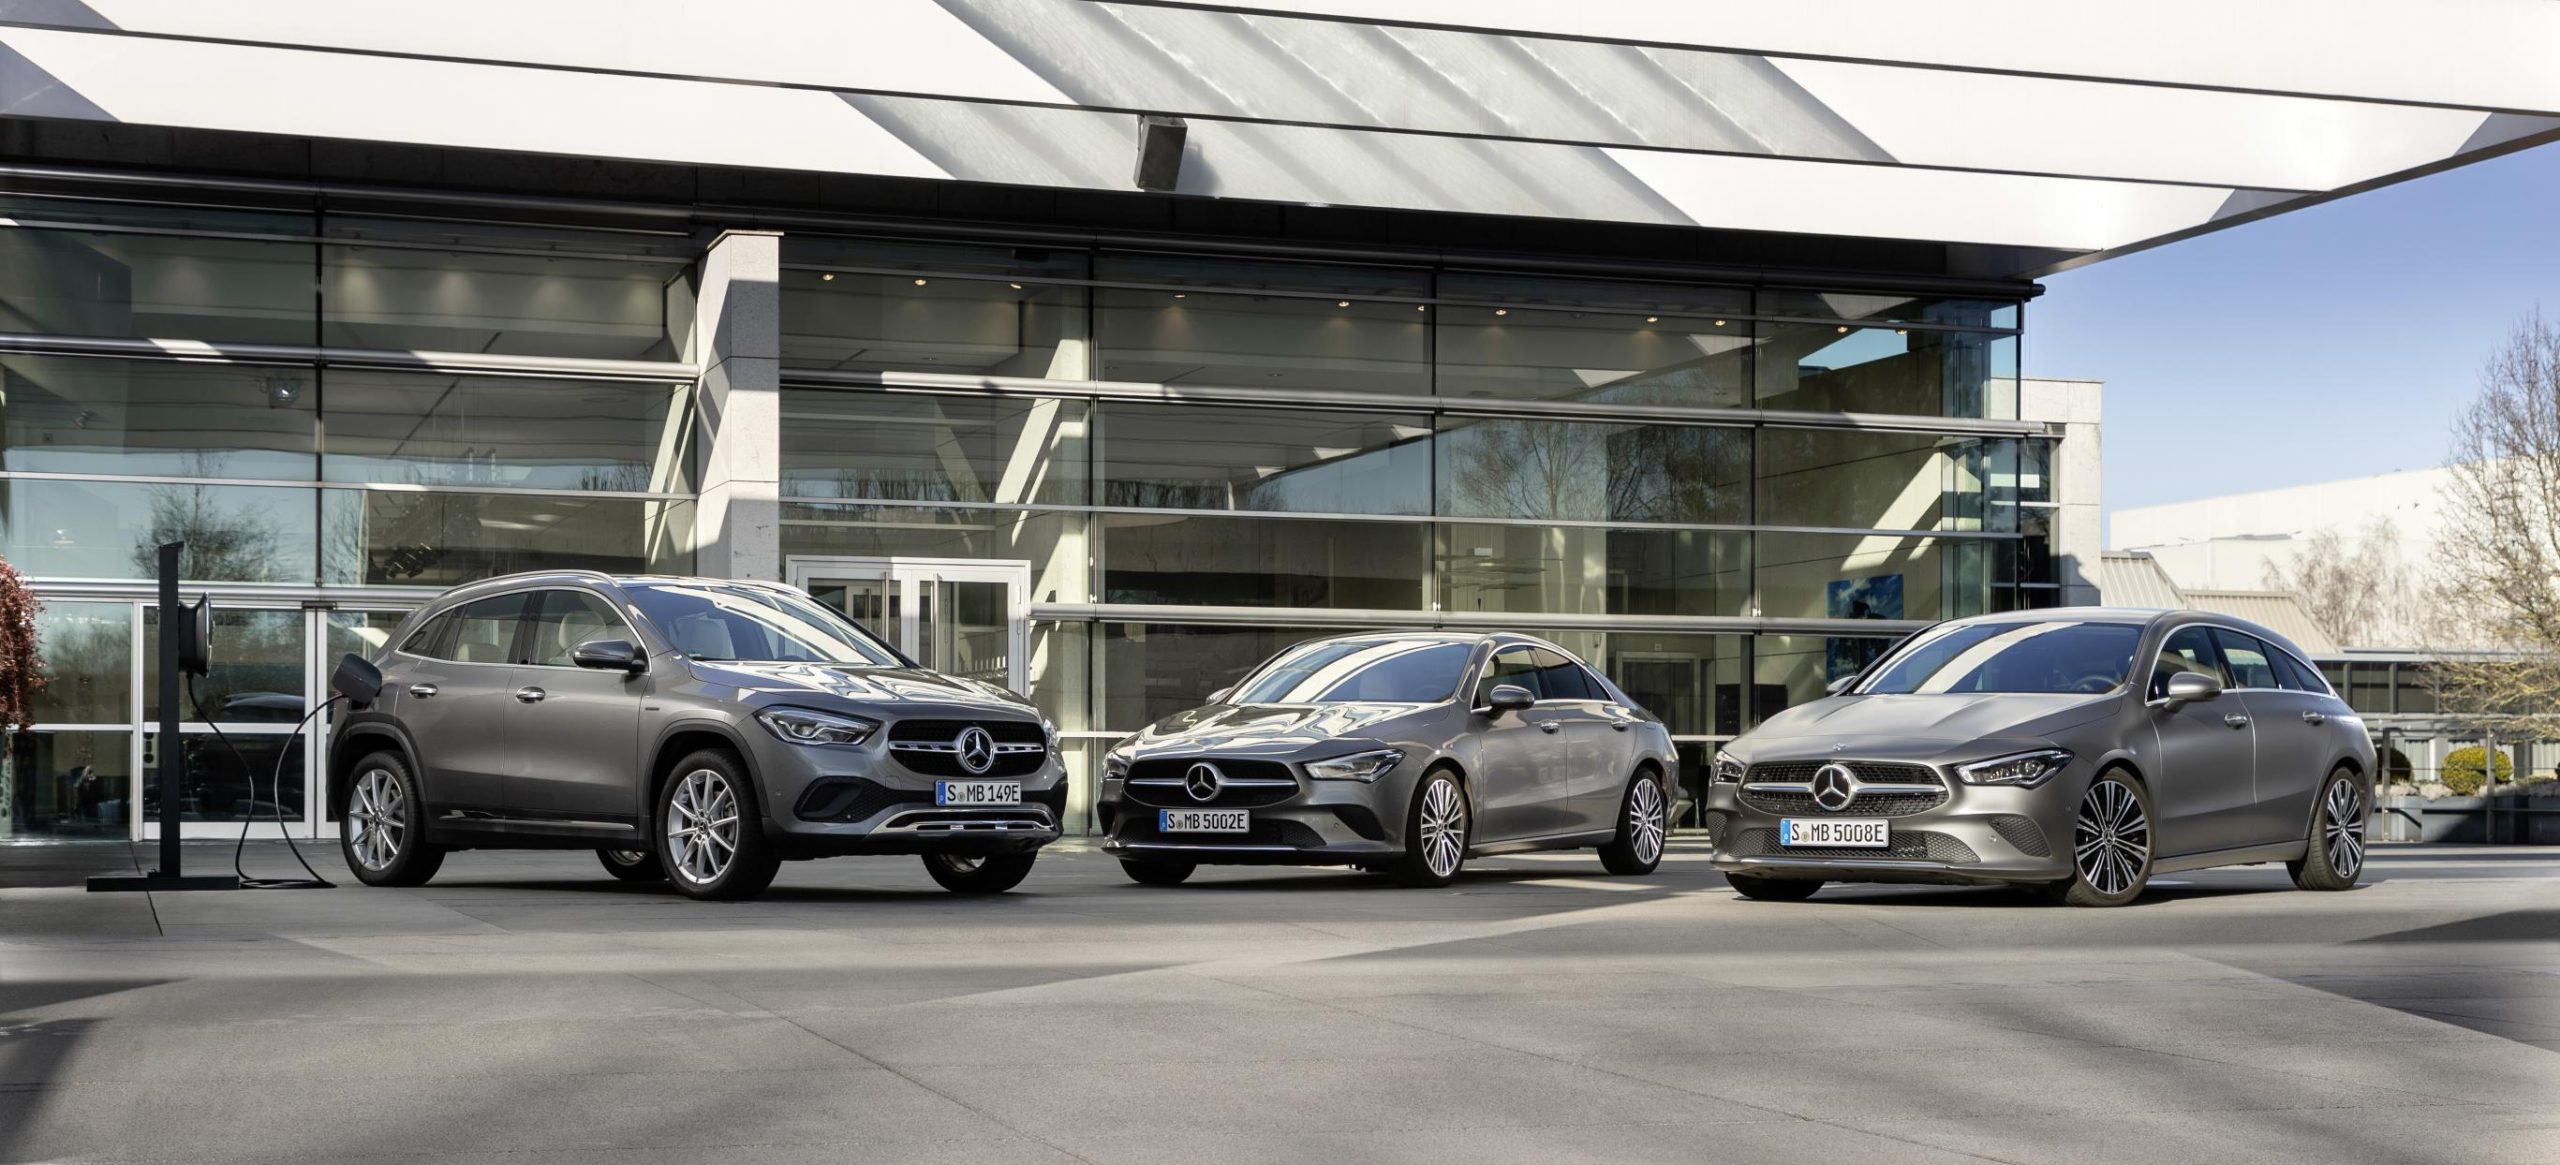 THREE NEW PLUG-IN HYBRID MODELS COMPLETE THE MERCEDES-BENZ COMPACT-CAR FAMILY